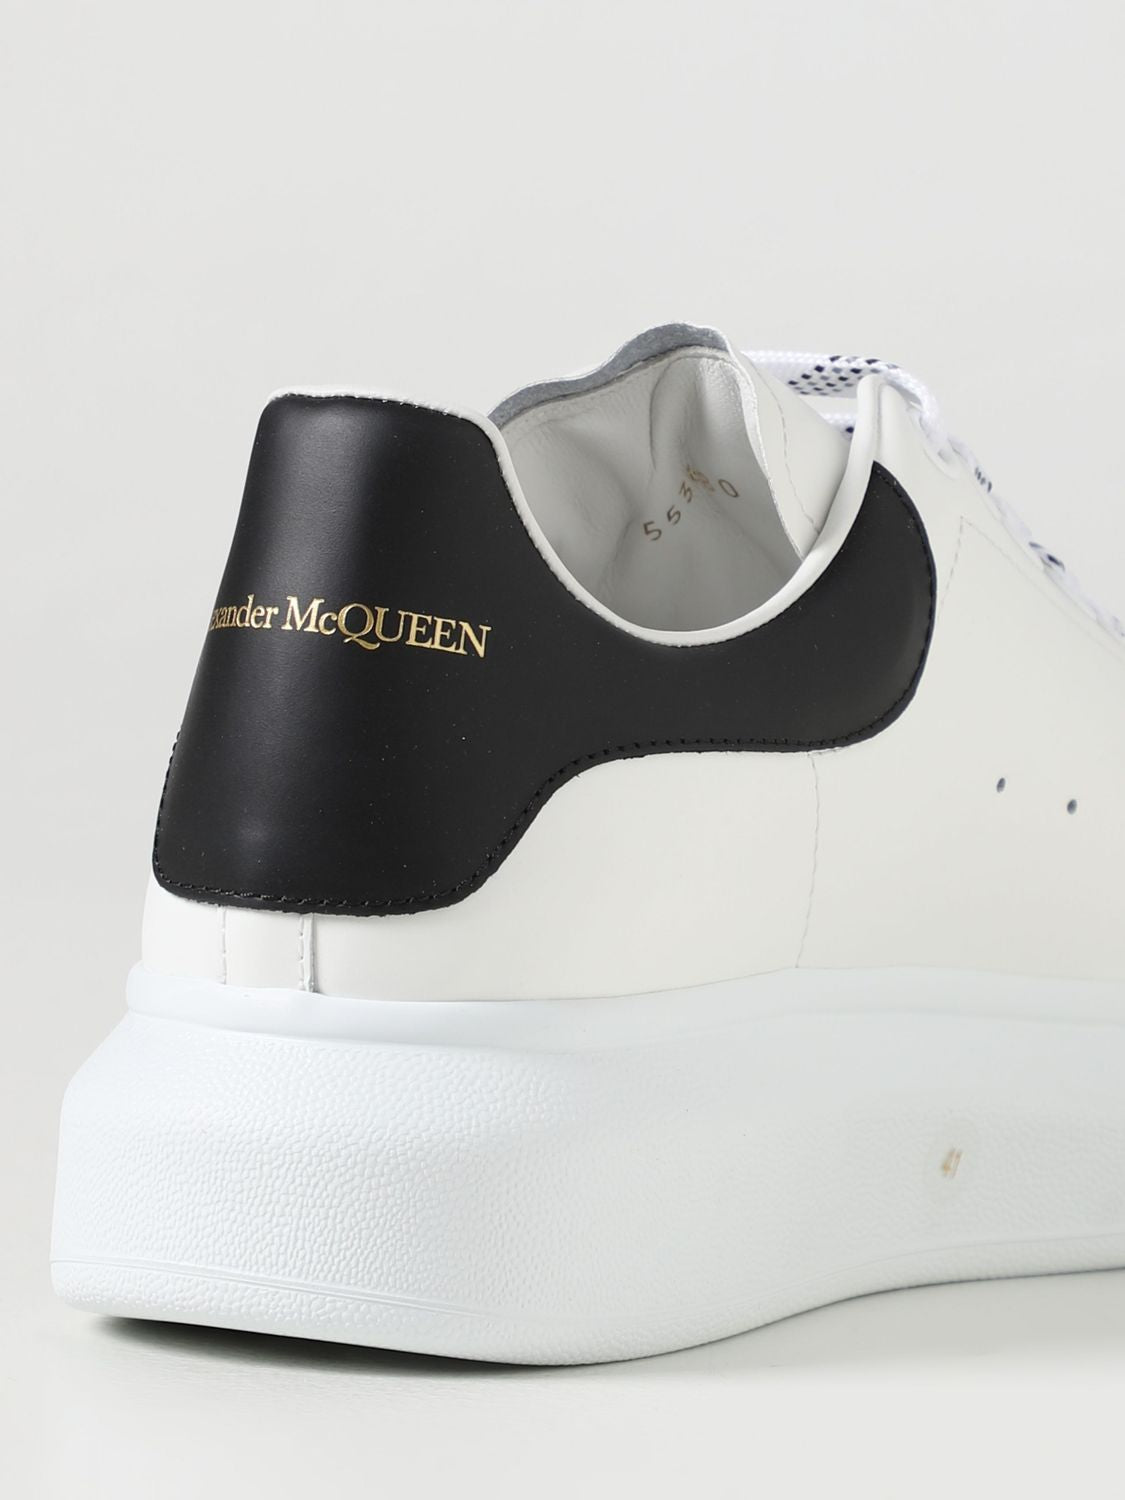 Classic White Leather Sneakers for Men - FW23 Collection